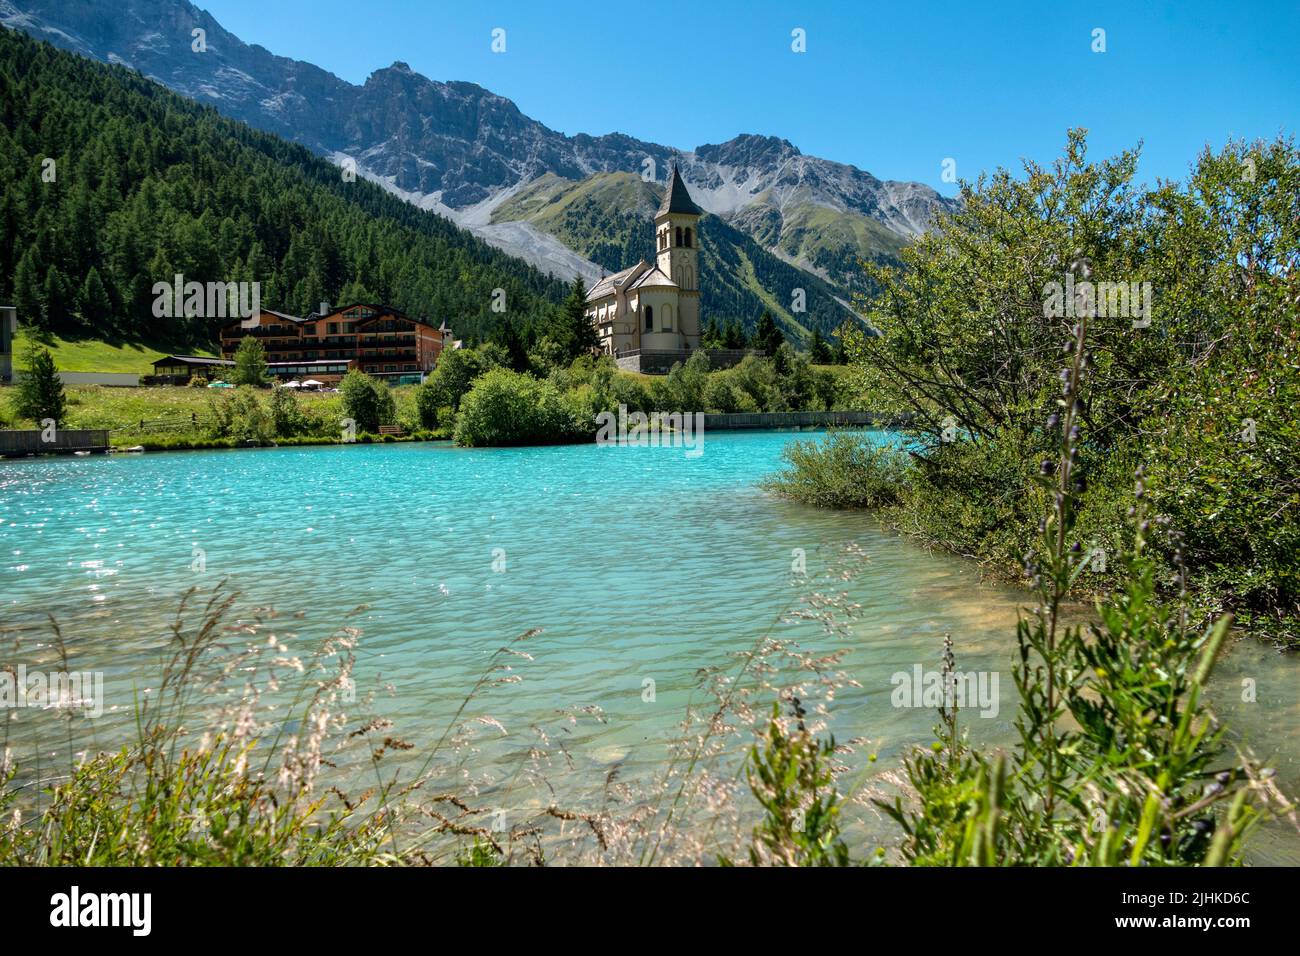 Church of St Gertrude Church in Sulden (Solda), a town in Vinschgau, Eastern Alps, South Tyrol, Italy. Stock Photo